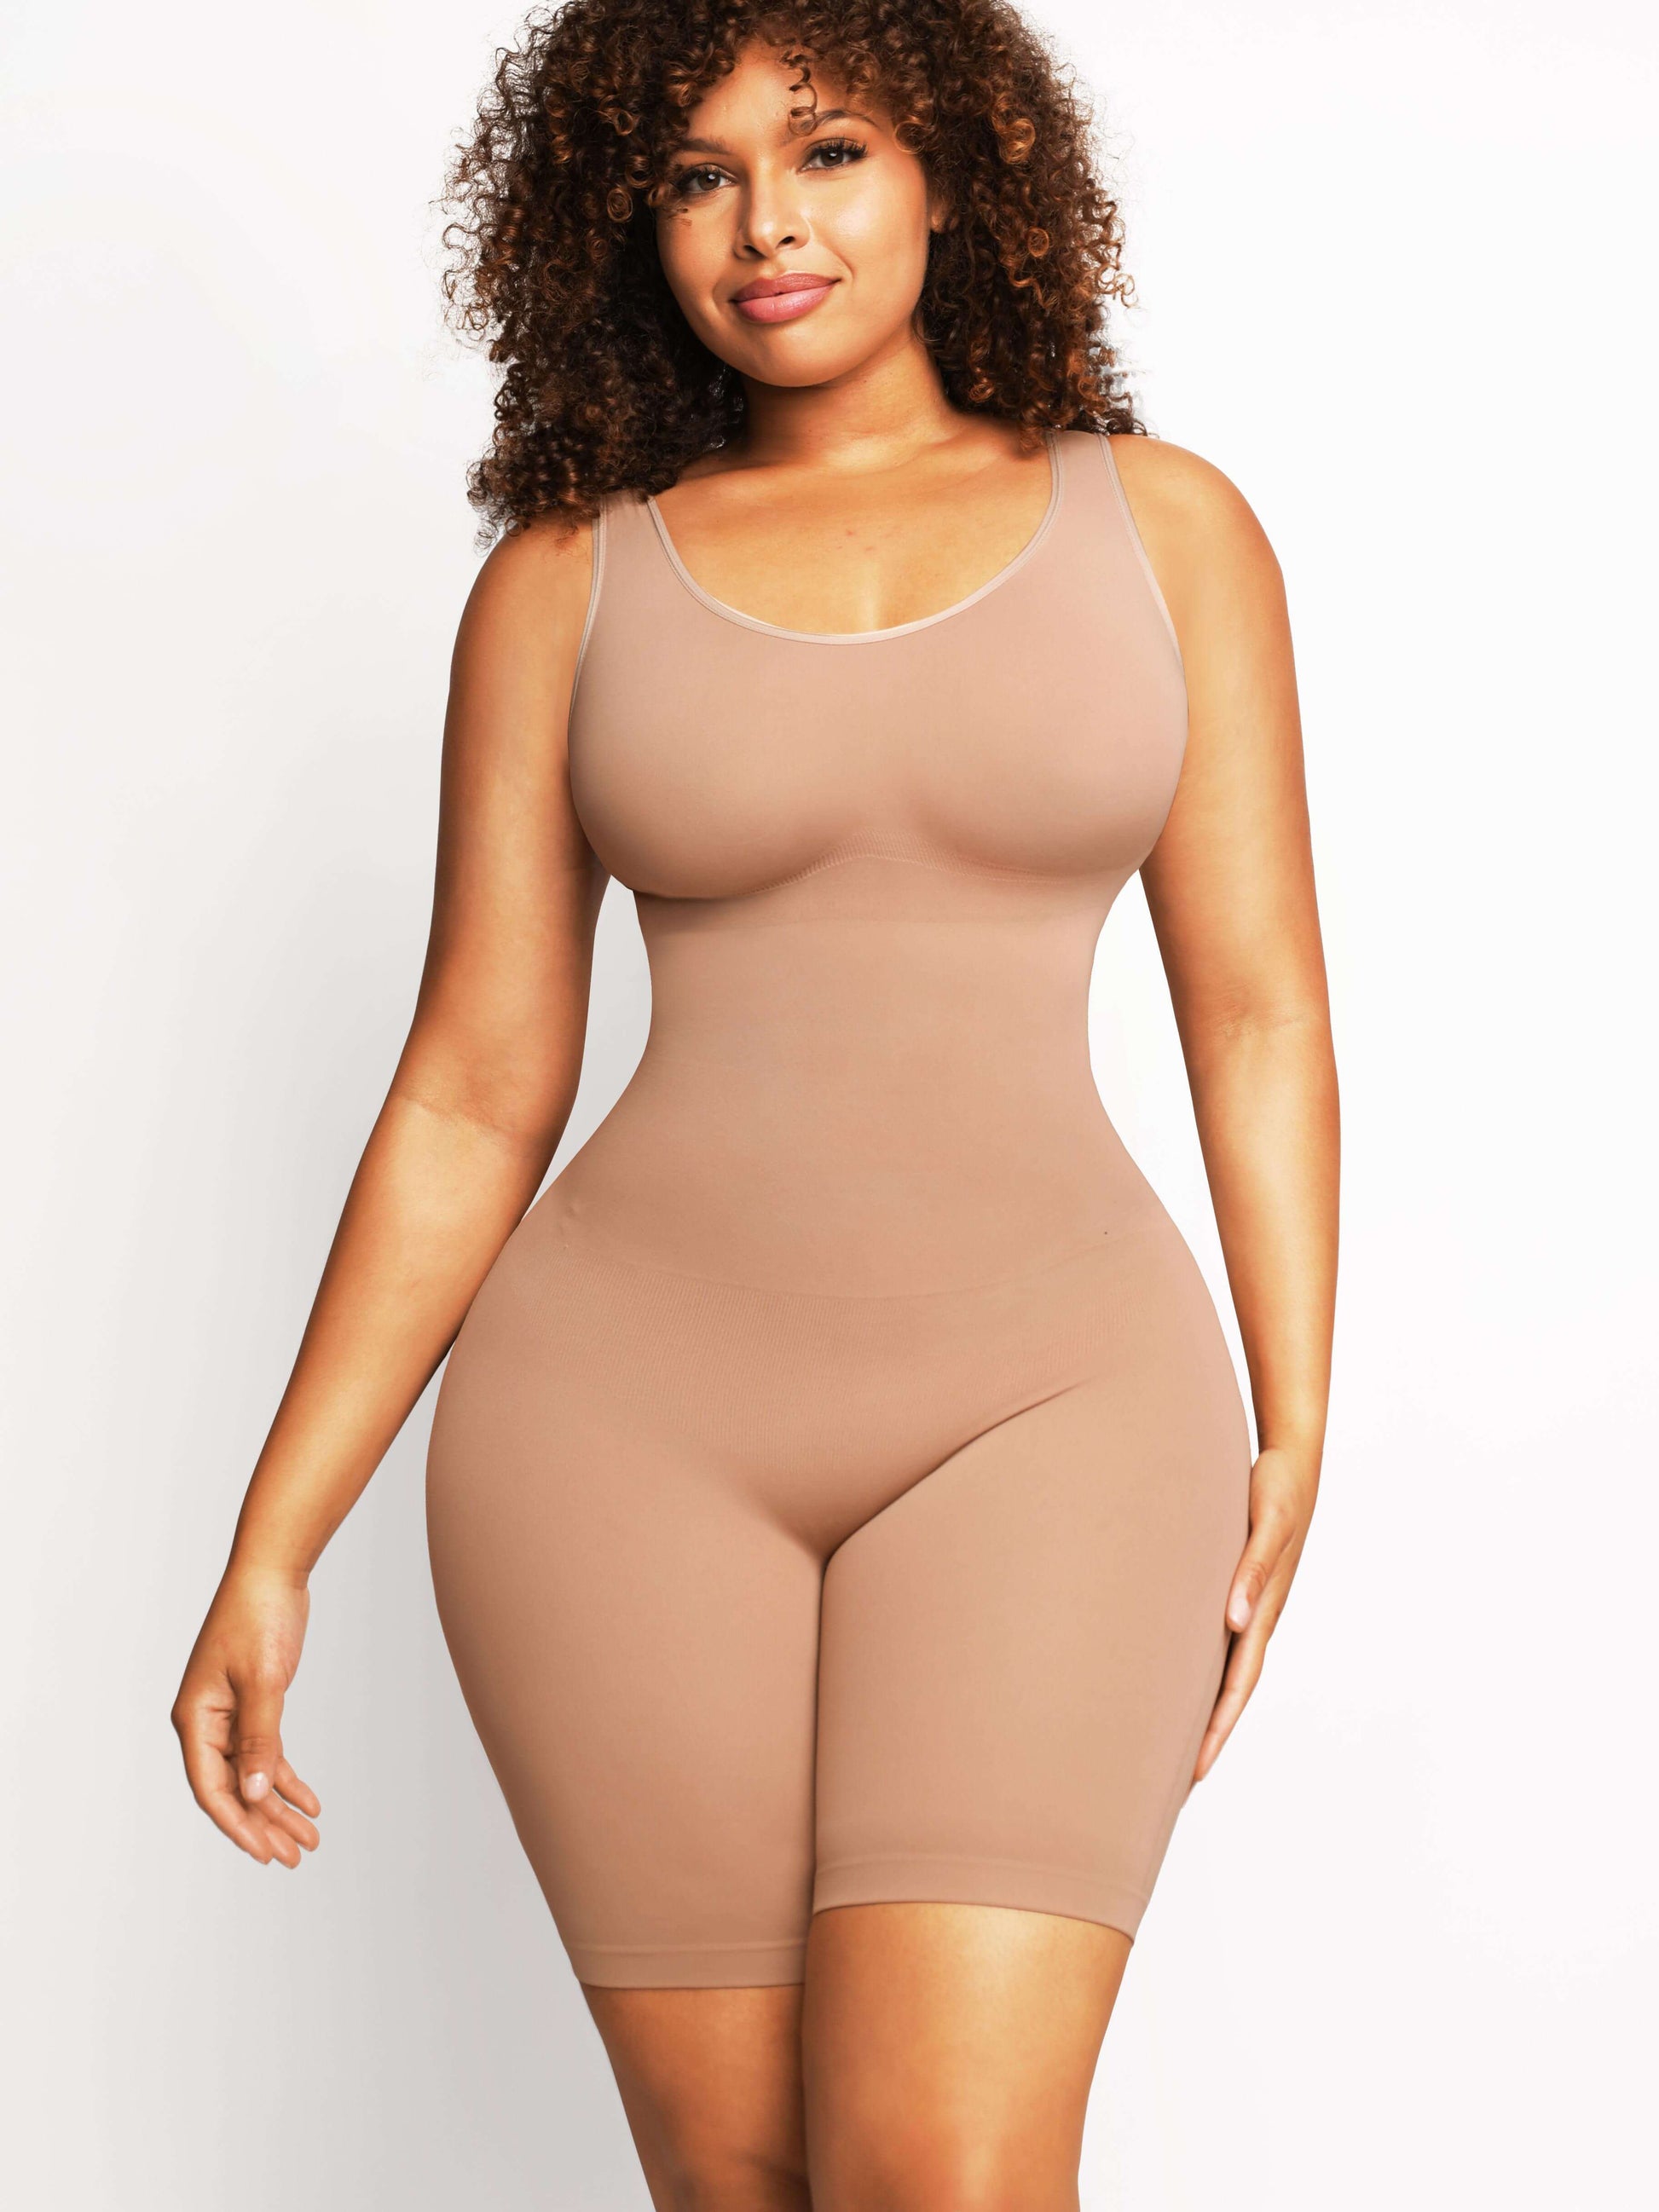 A nude shapewear collection that will leave others blushing